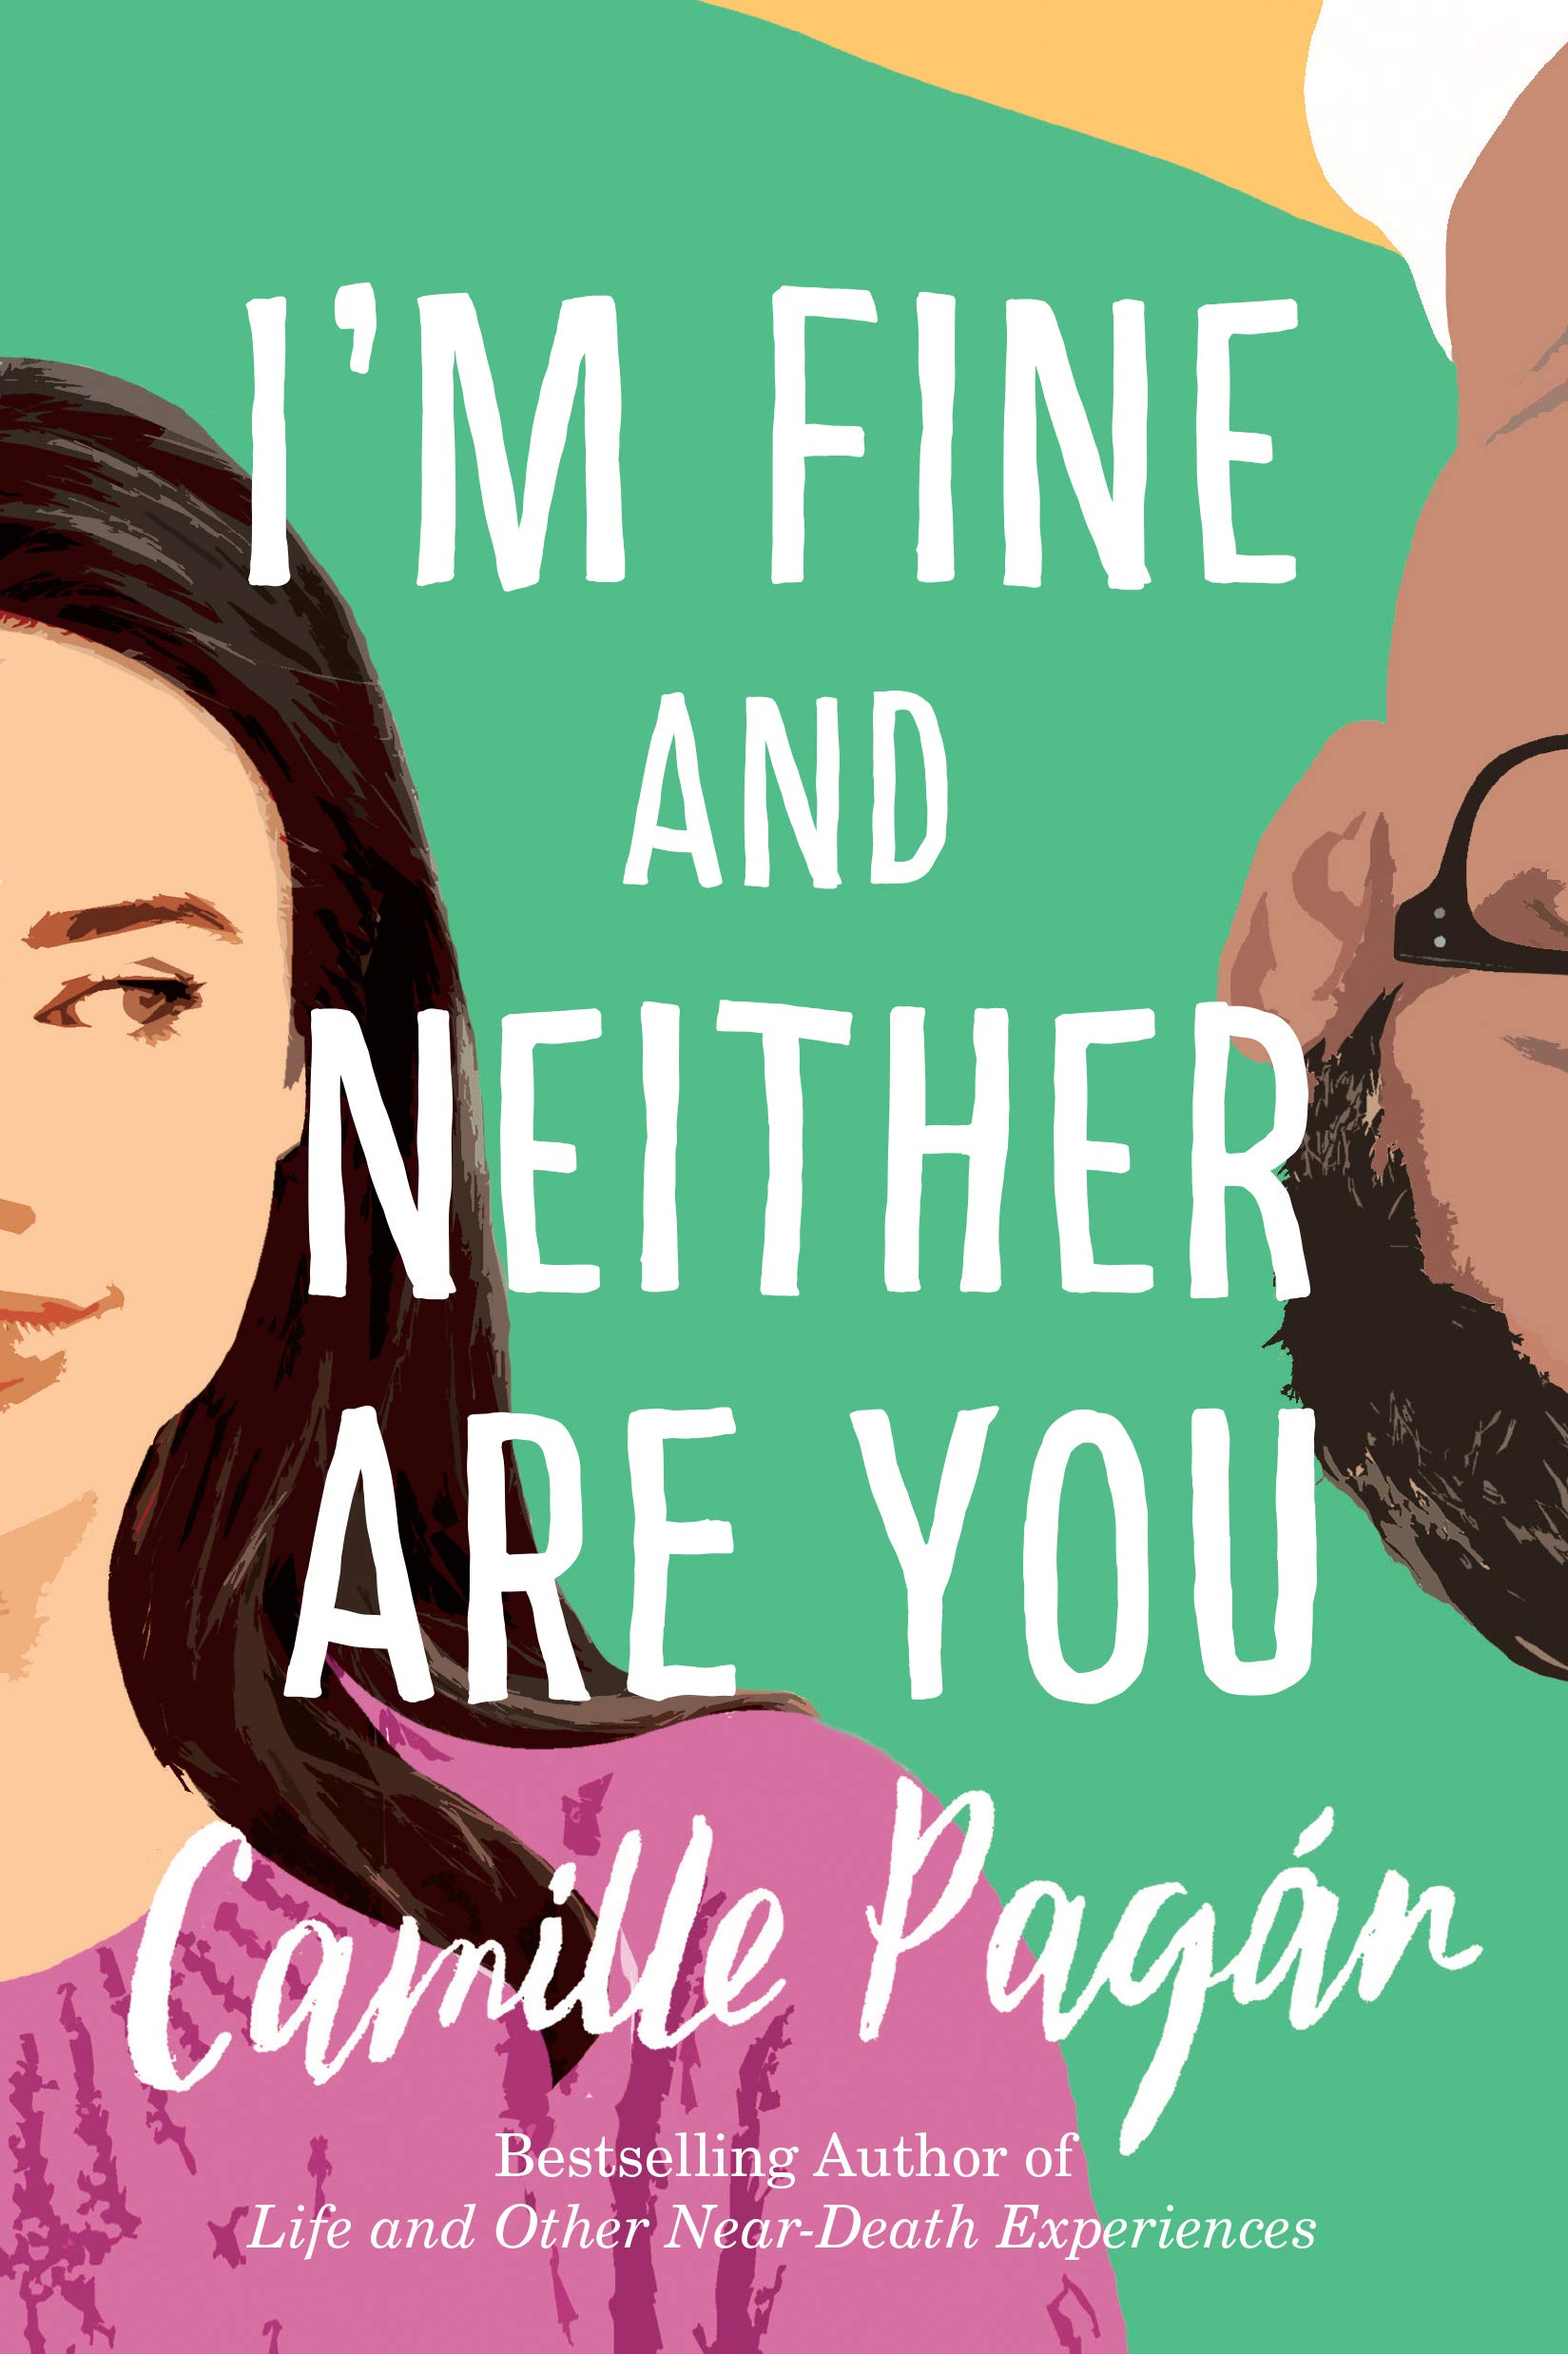 Great new books by diverse women authors: I'm Fine and Neither are You by Camille Pagán